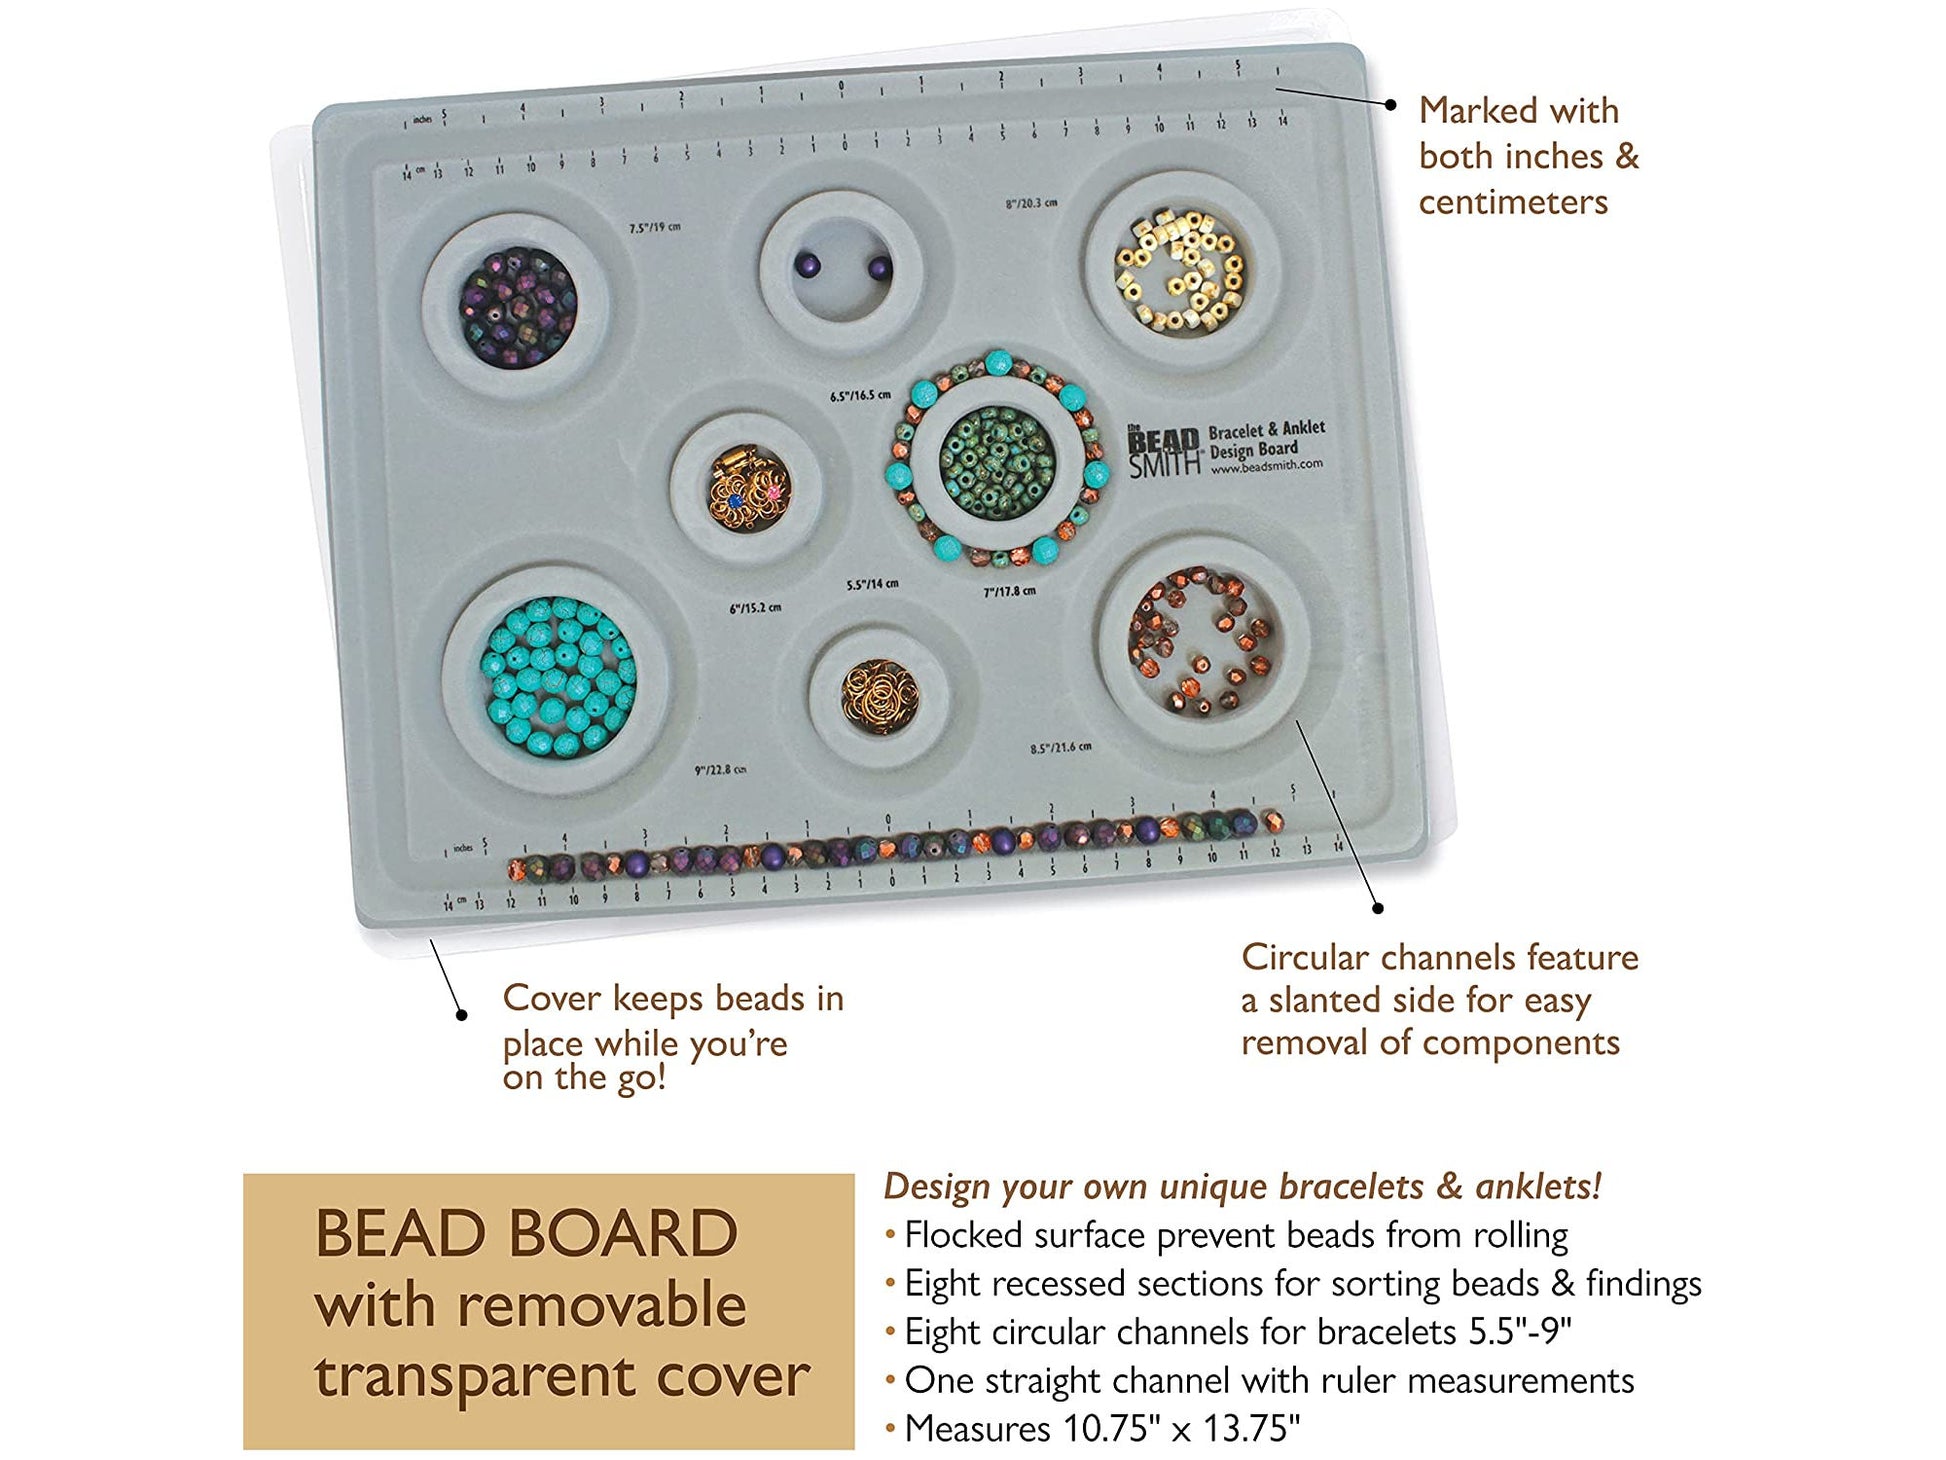 BRACELET BEAD BOARD with Lid and 8 Circular Channels for 5.5-9in